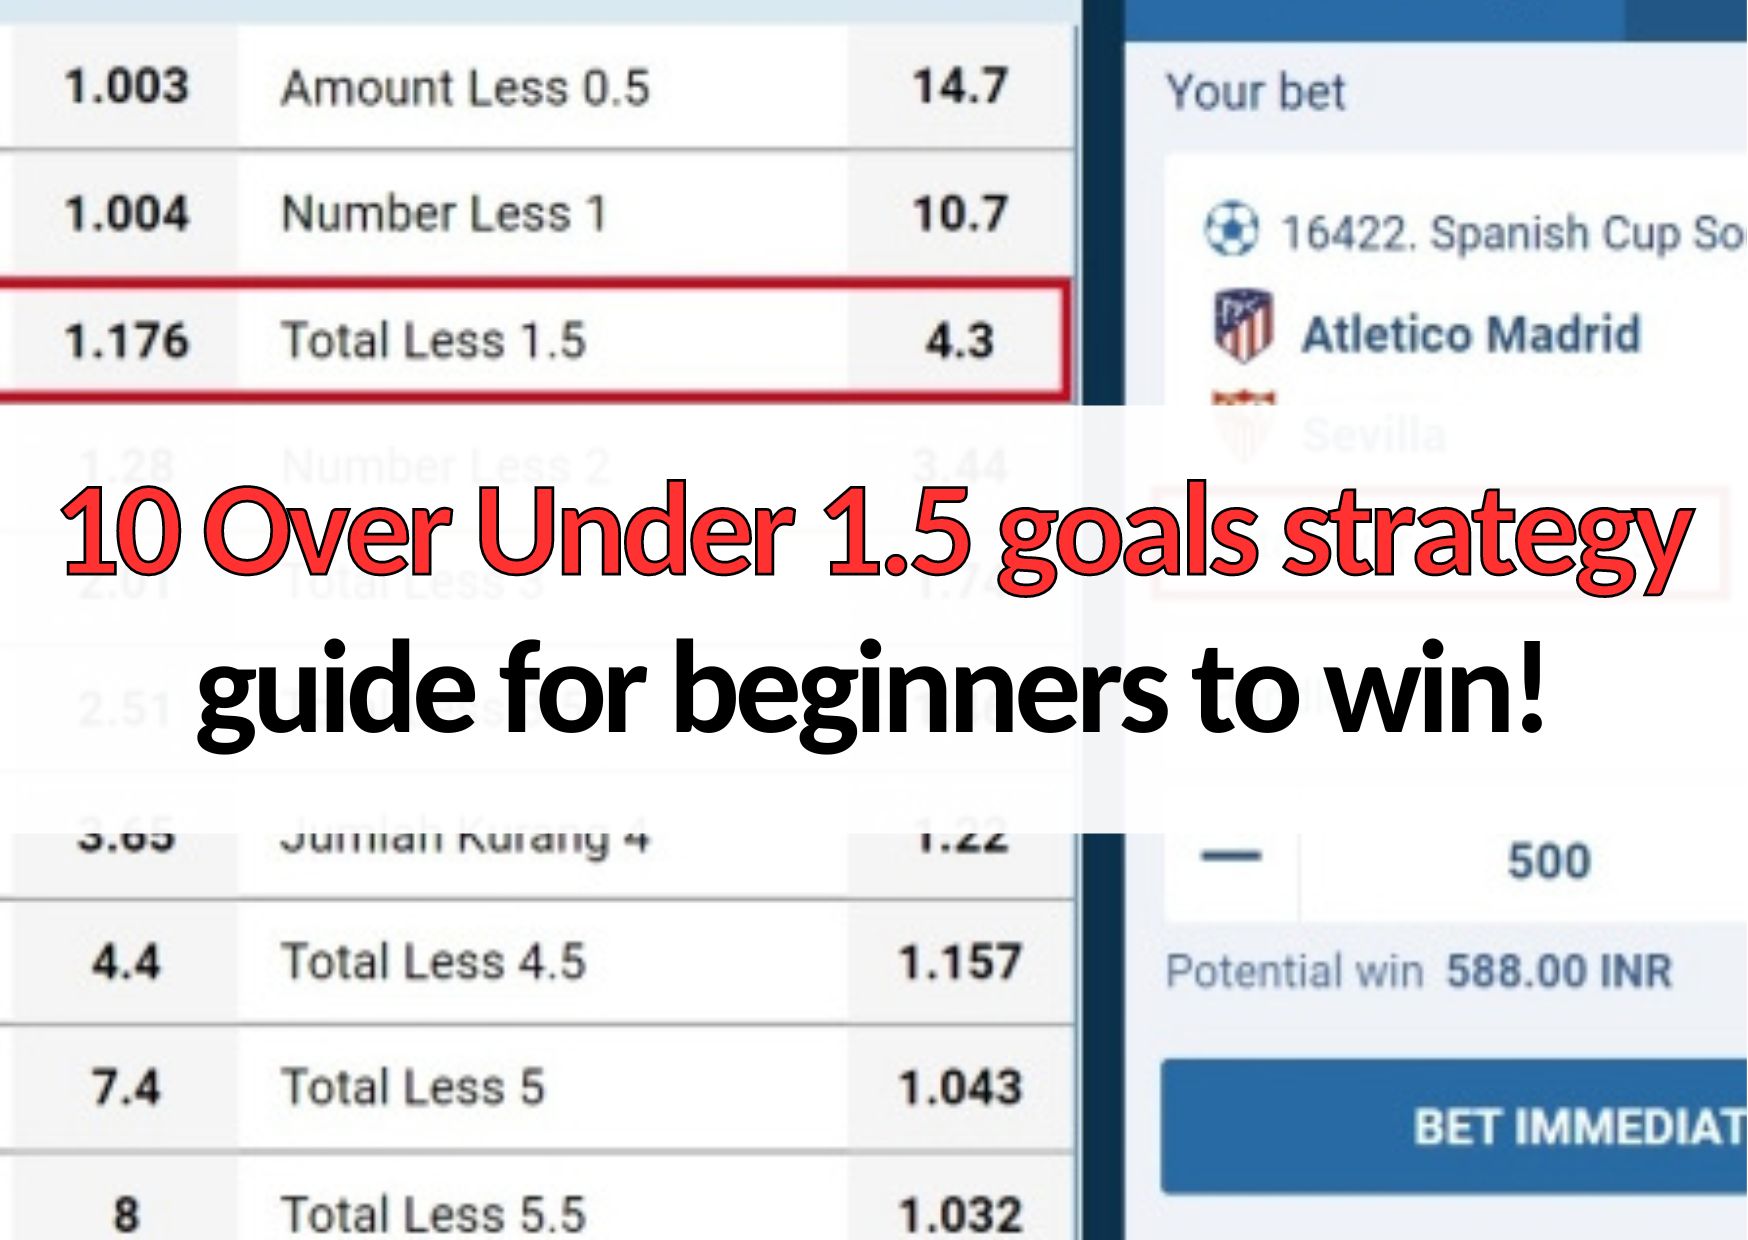 10 over under 1.5 goals strategy guide for beginners to win